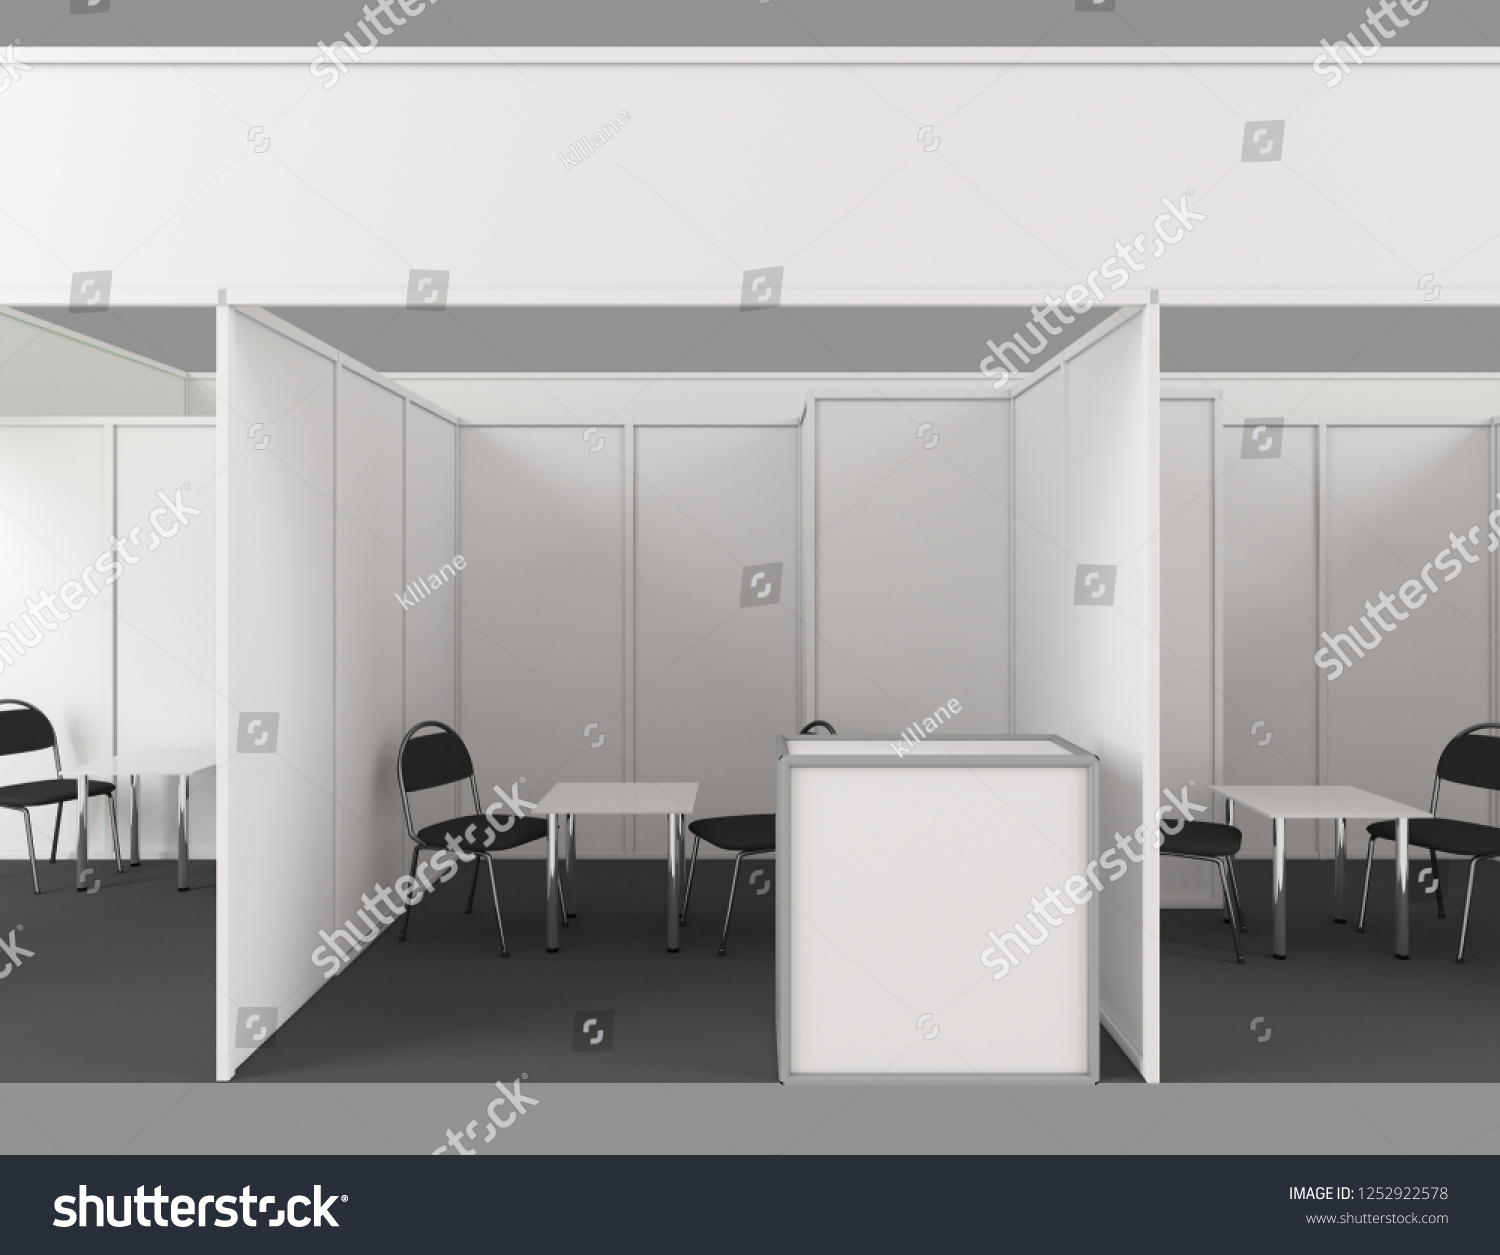 3d Trade Show Booth 3 Segments Stock Illustration 1252922578